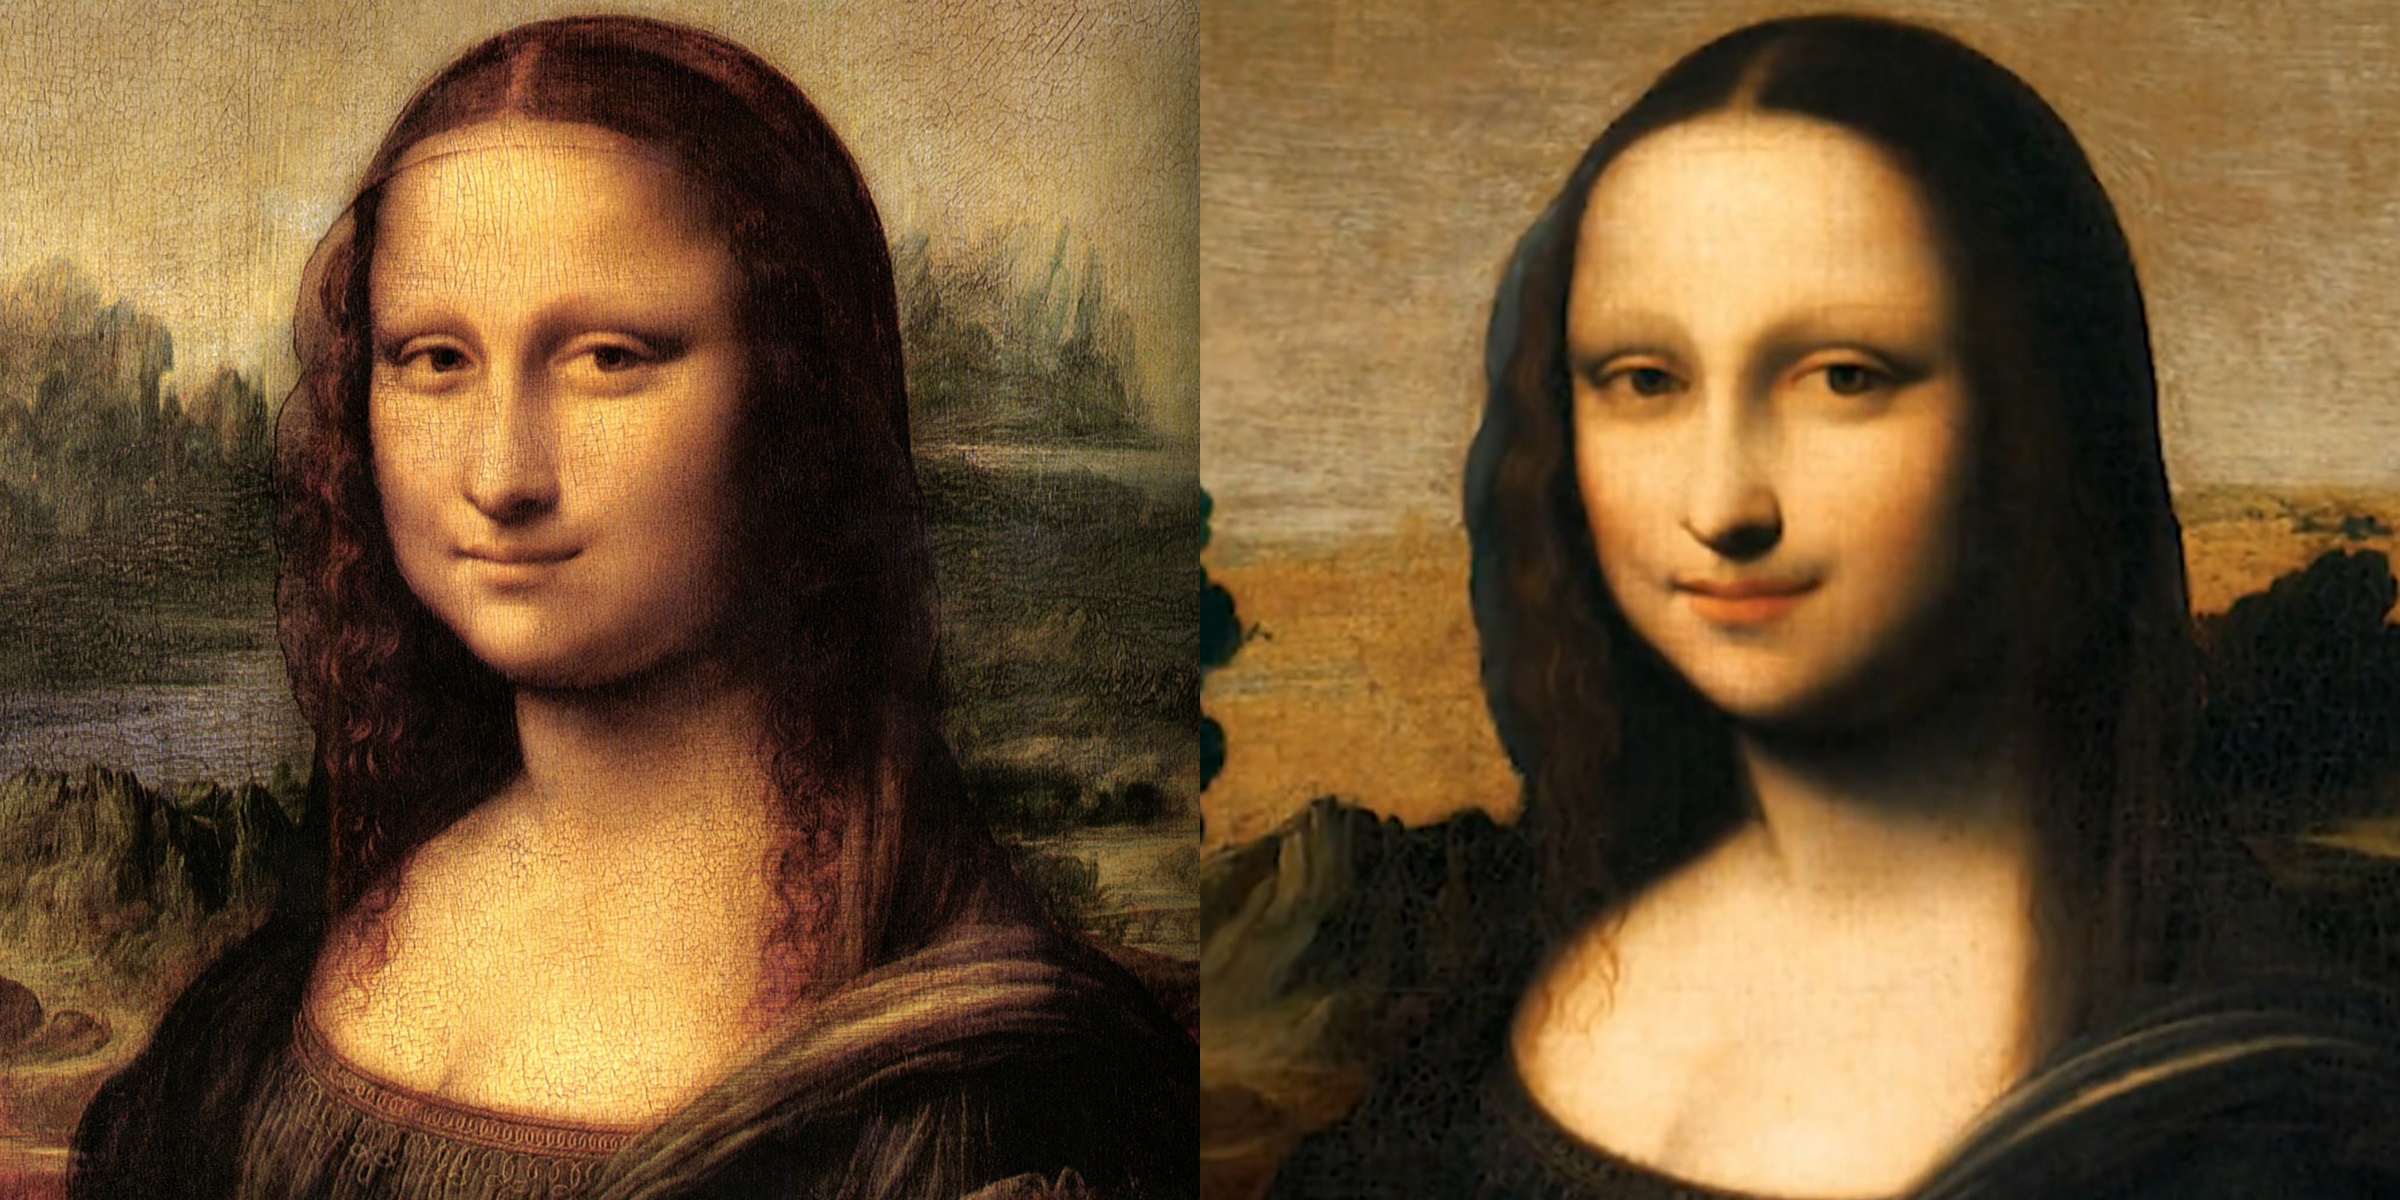 Double Mona Lisa Showdown: Is There Another One by Leonardo or What?